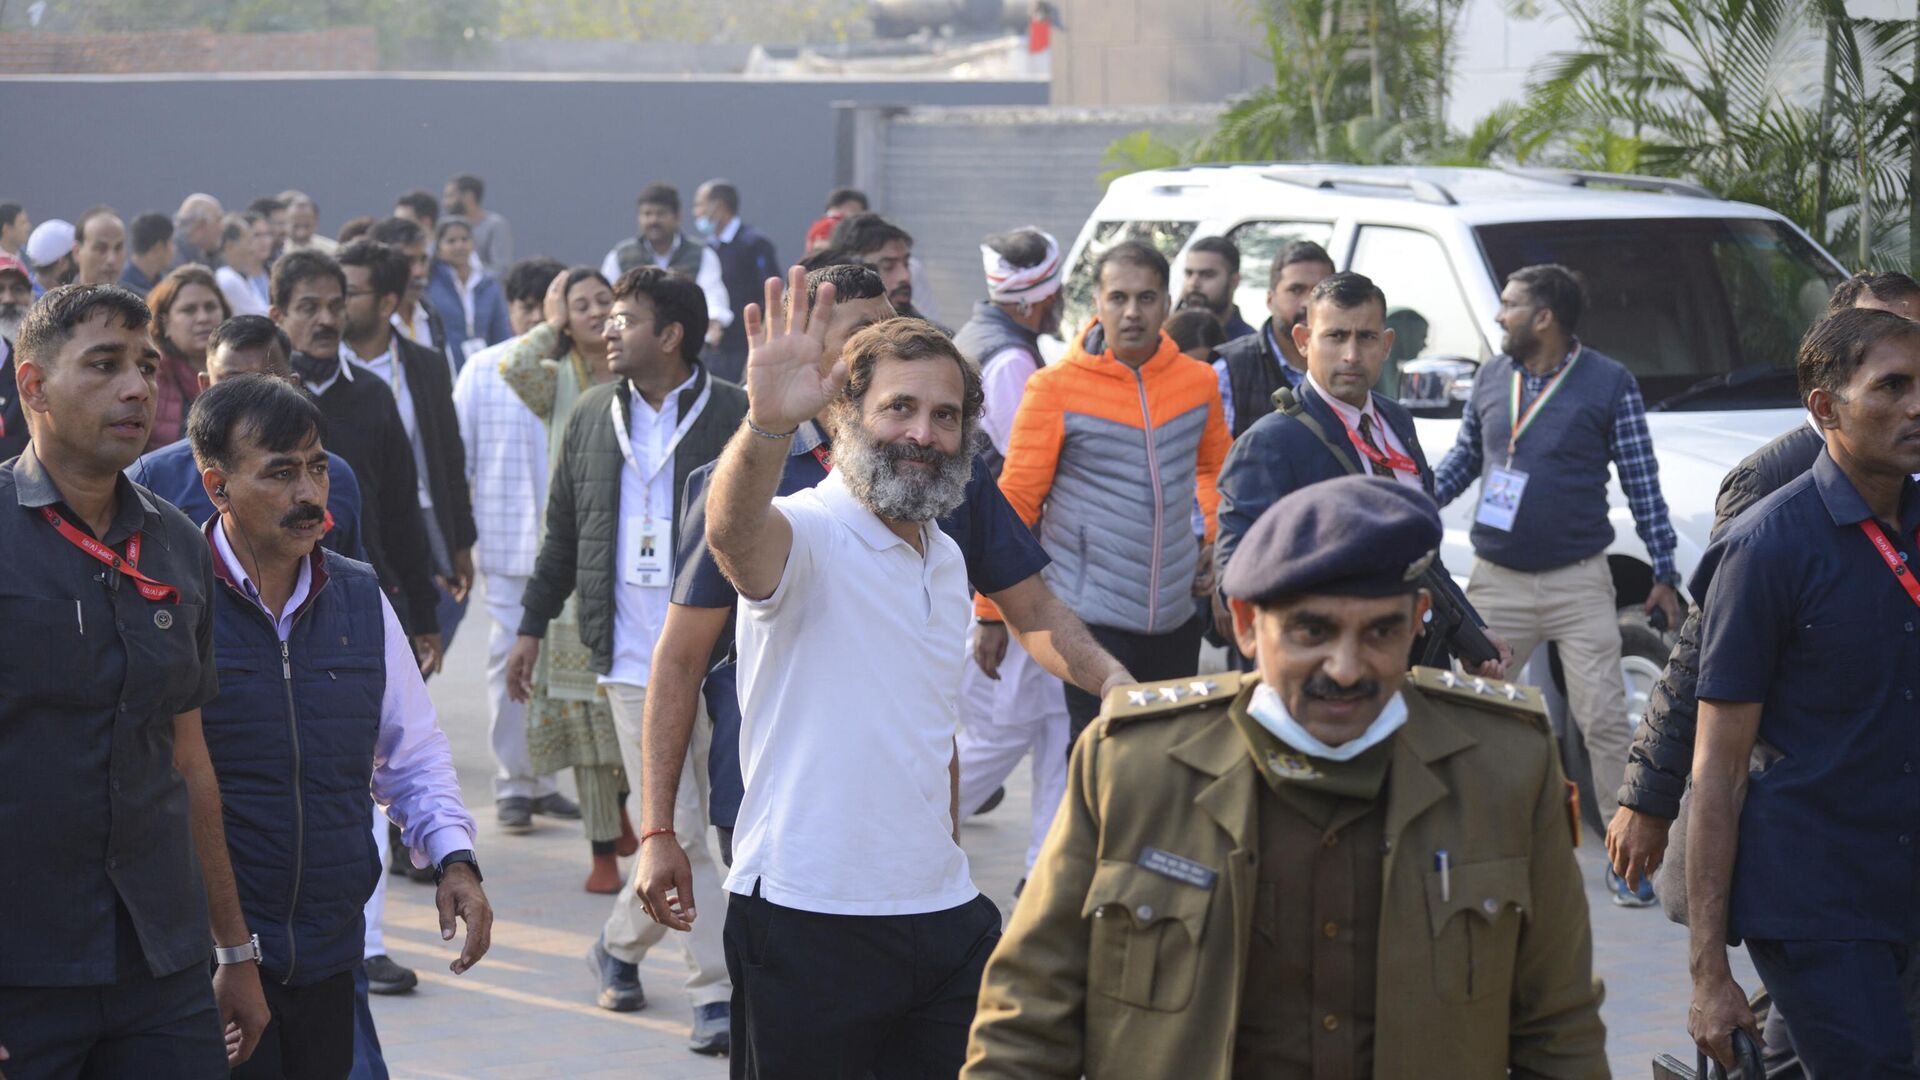 India's Congress party leader Rahul Gandhi (C) takes part in the 'Bharat Jodo Yatra' march in New Delhi on December 24, 2022 - Sputnik India, 1920, 14.01.2023